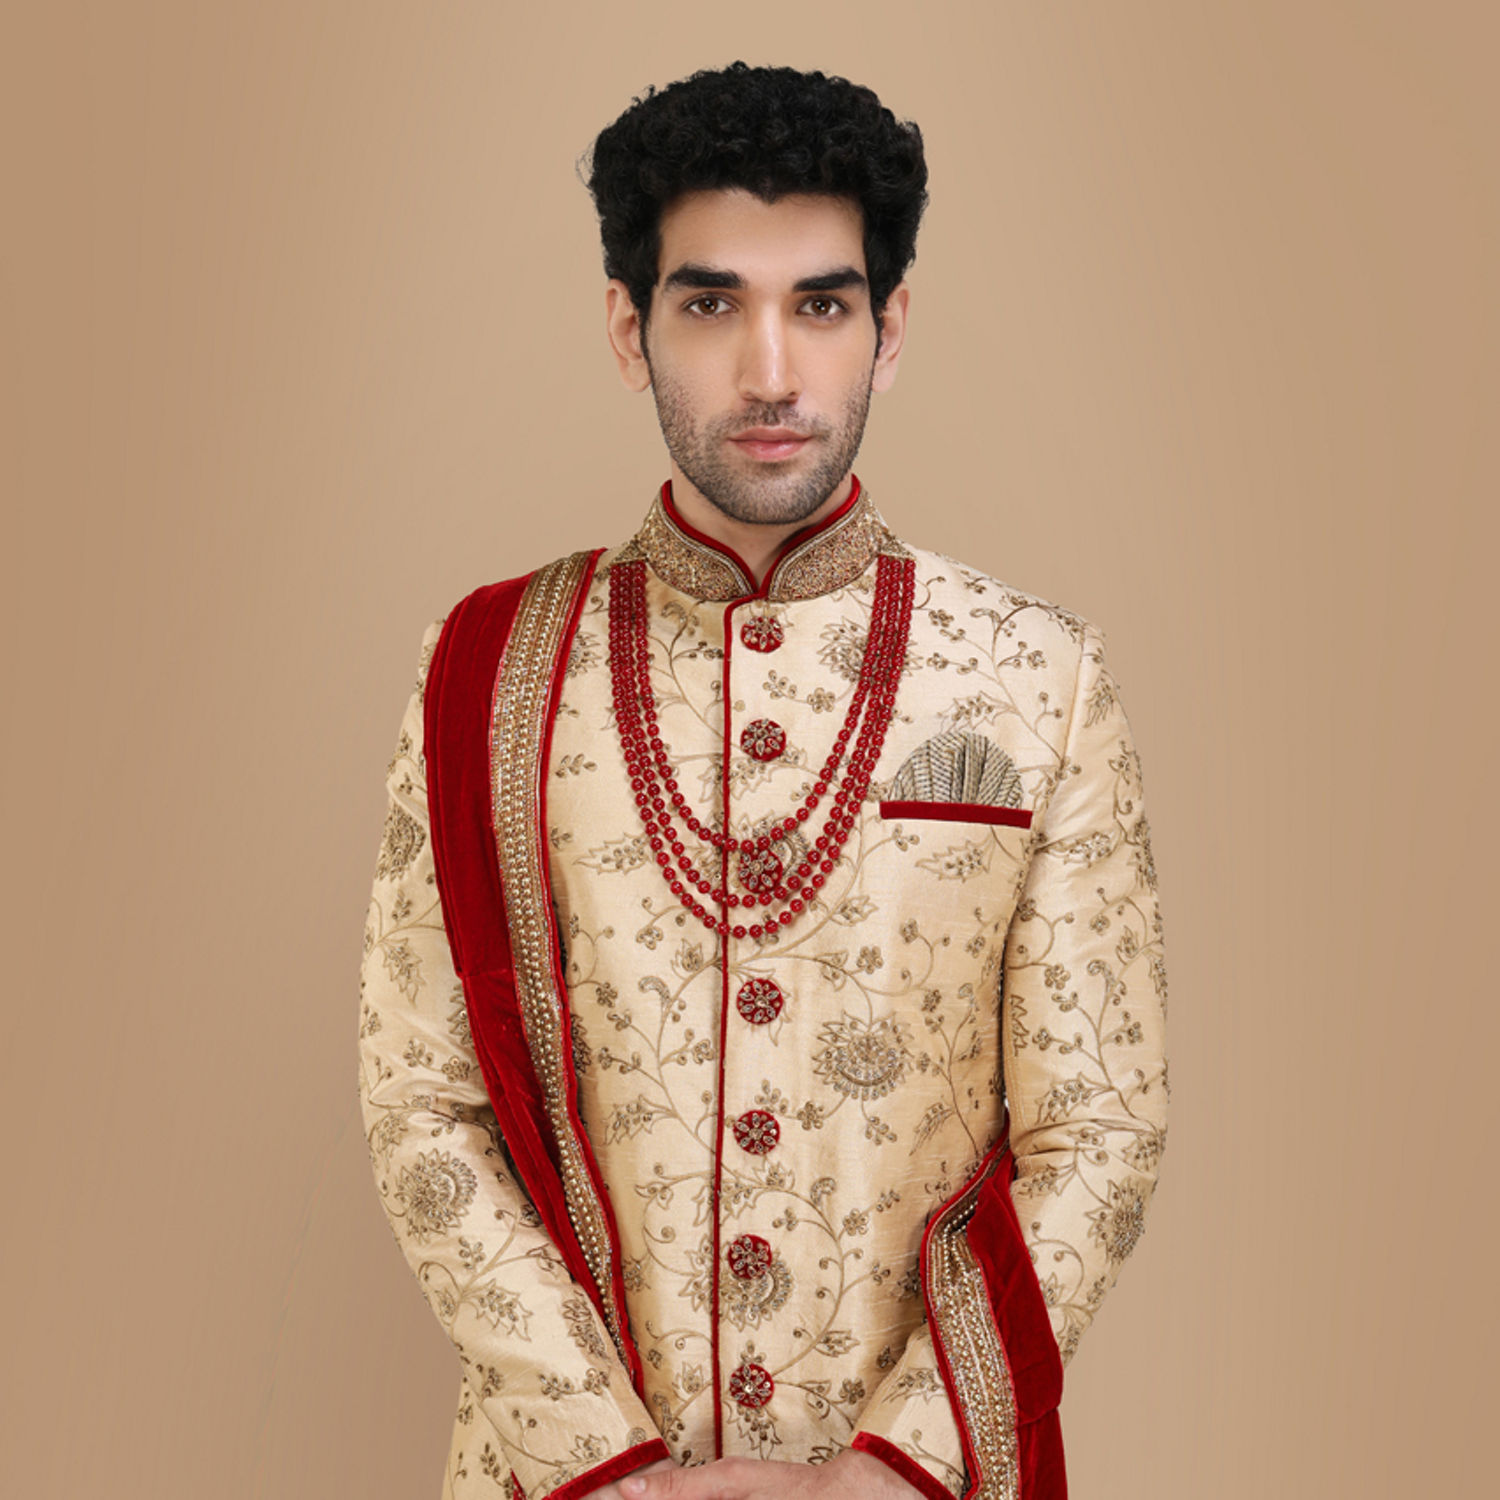 Indian Pakistani Wedding Wear for Men, Groom Wedding Outfit, Indian Mens  Wear, Sherwani for Men, Indian Dress for Men, Colors Available - Etsy